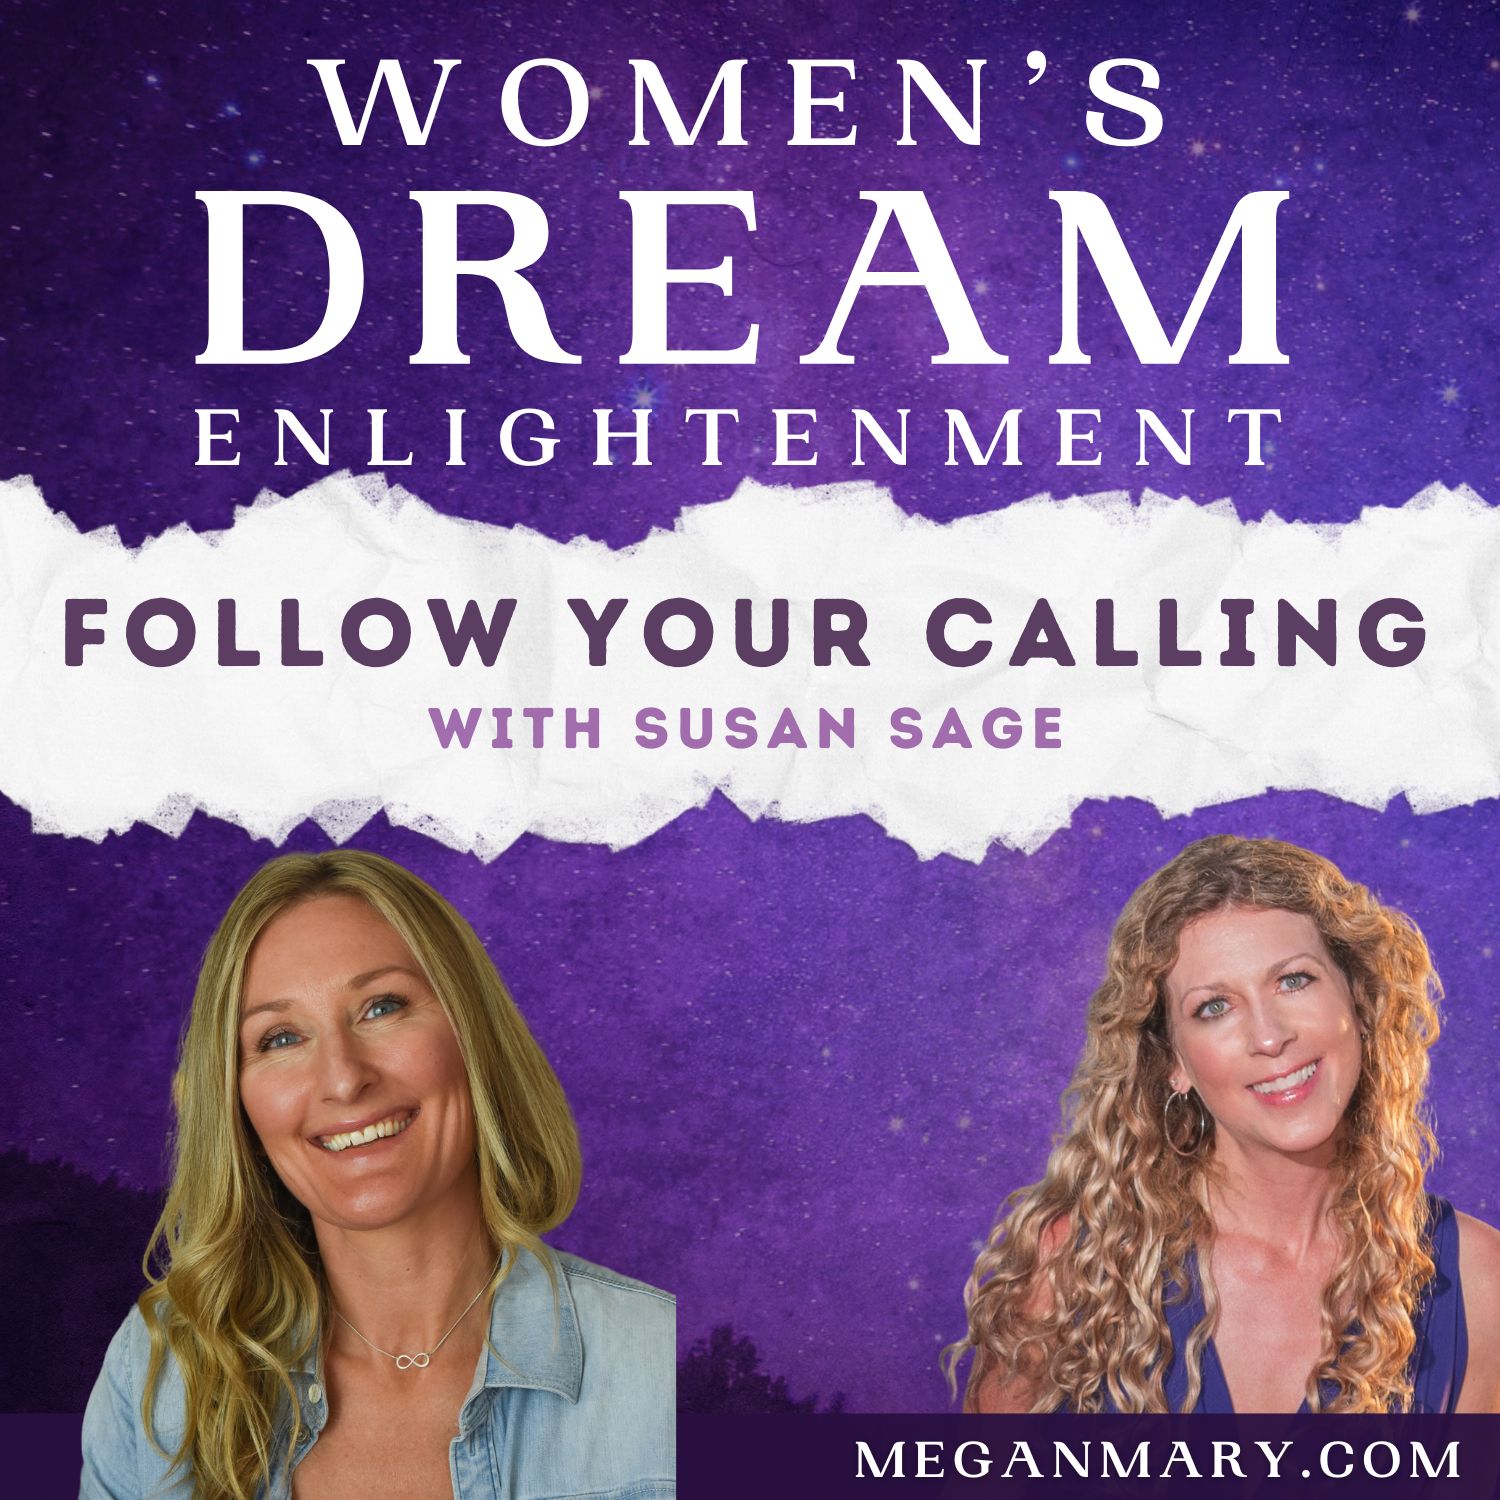 Following Your Calling with Susan Sage